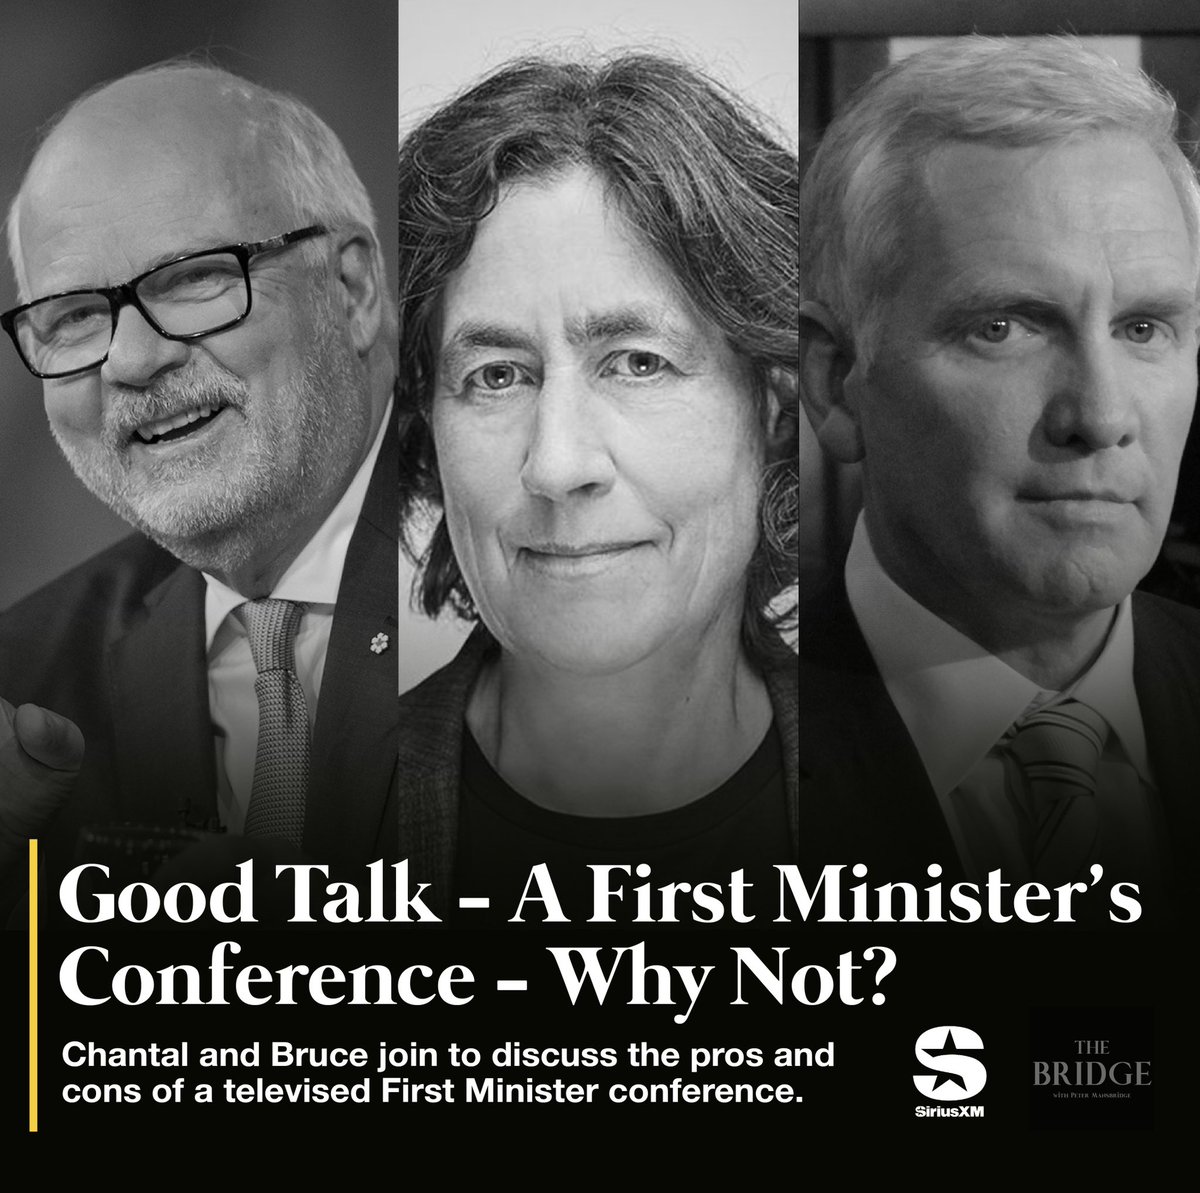 What’s the downside for Justin Trudeau in calling a First Minister’s conference? What’s he got to lose? That’s our focus today on Good Talk with @ChantalHbert and @bruceanderson Noon EST on @CanadaTalks167, all podcast platforms, or on YouTube. 📍youtu.be/DqX_SS_9PuE